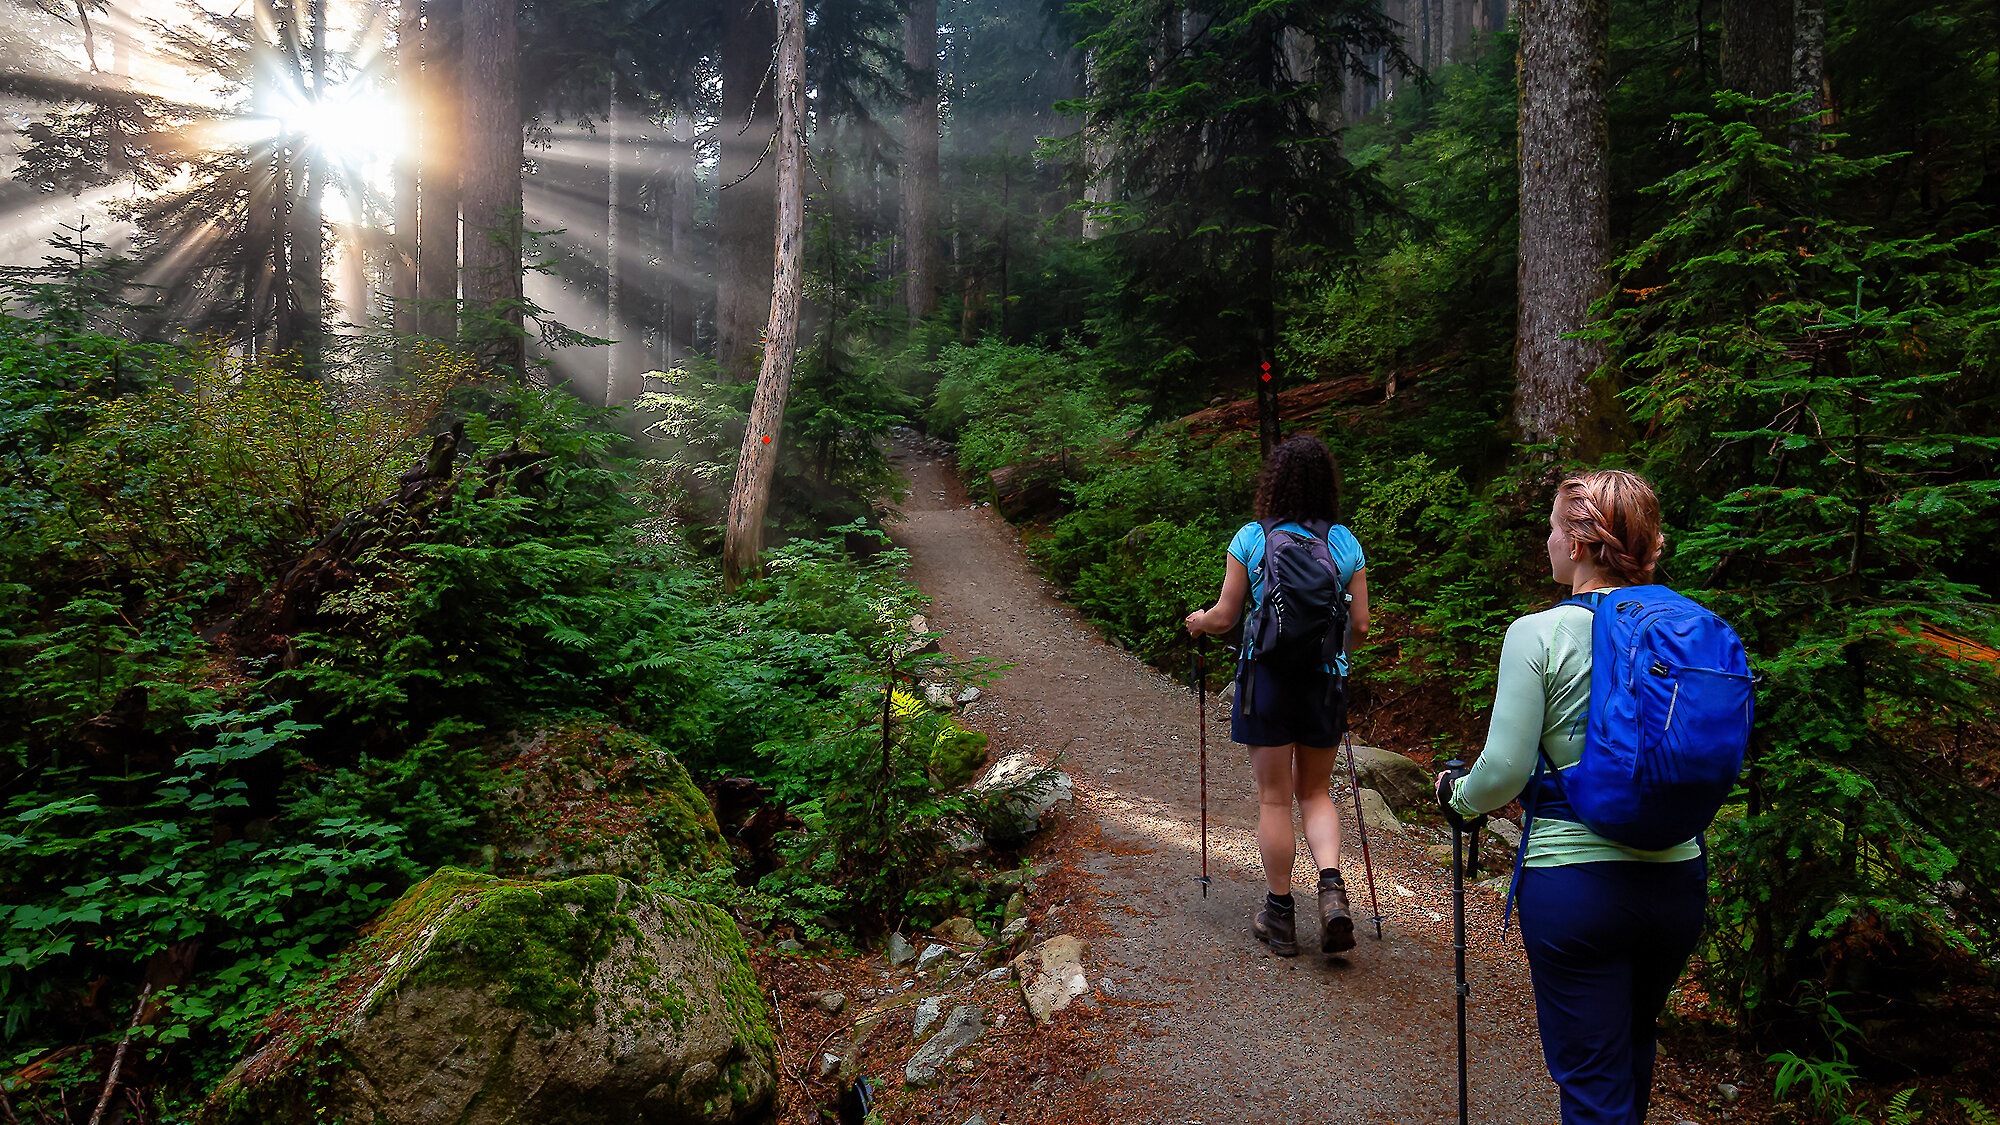 Two women out hiking along the trail using poles to help them navigate as the sun bursts through the trees.